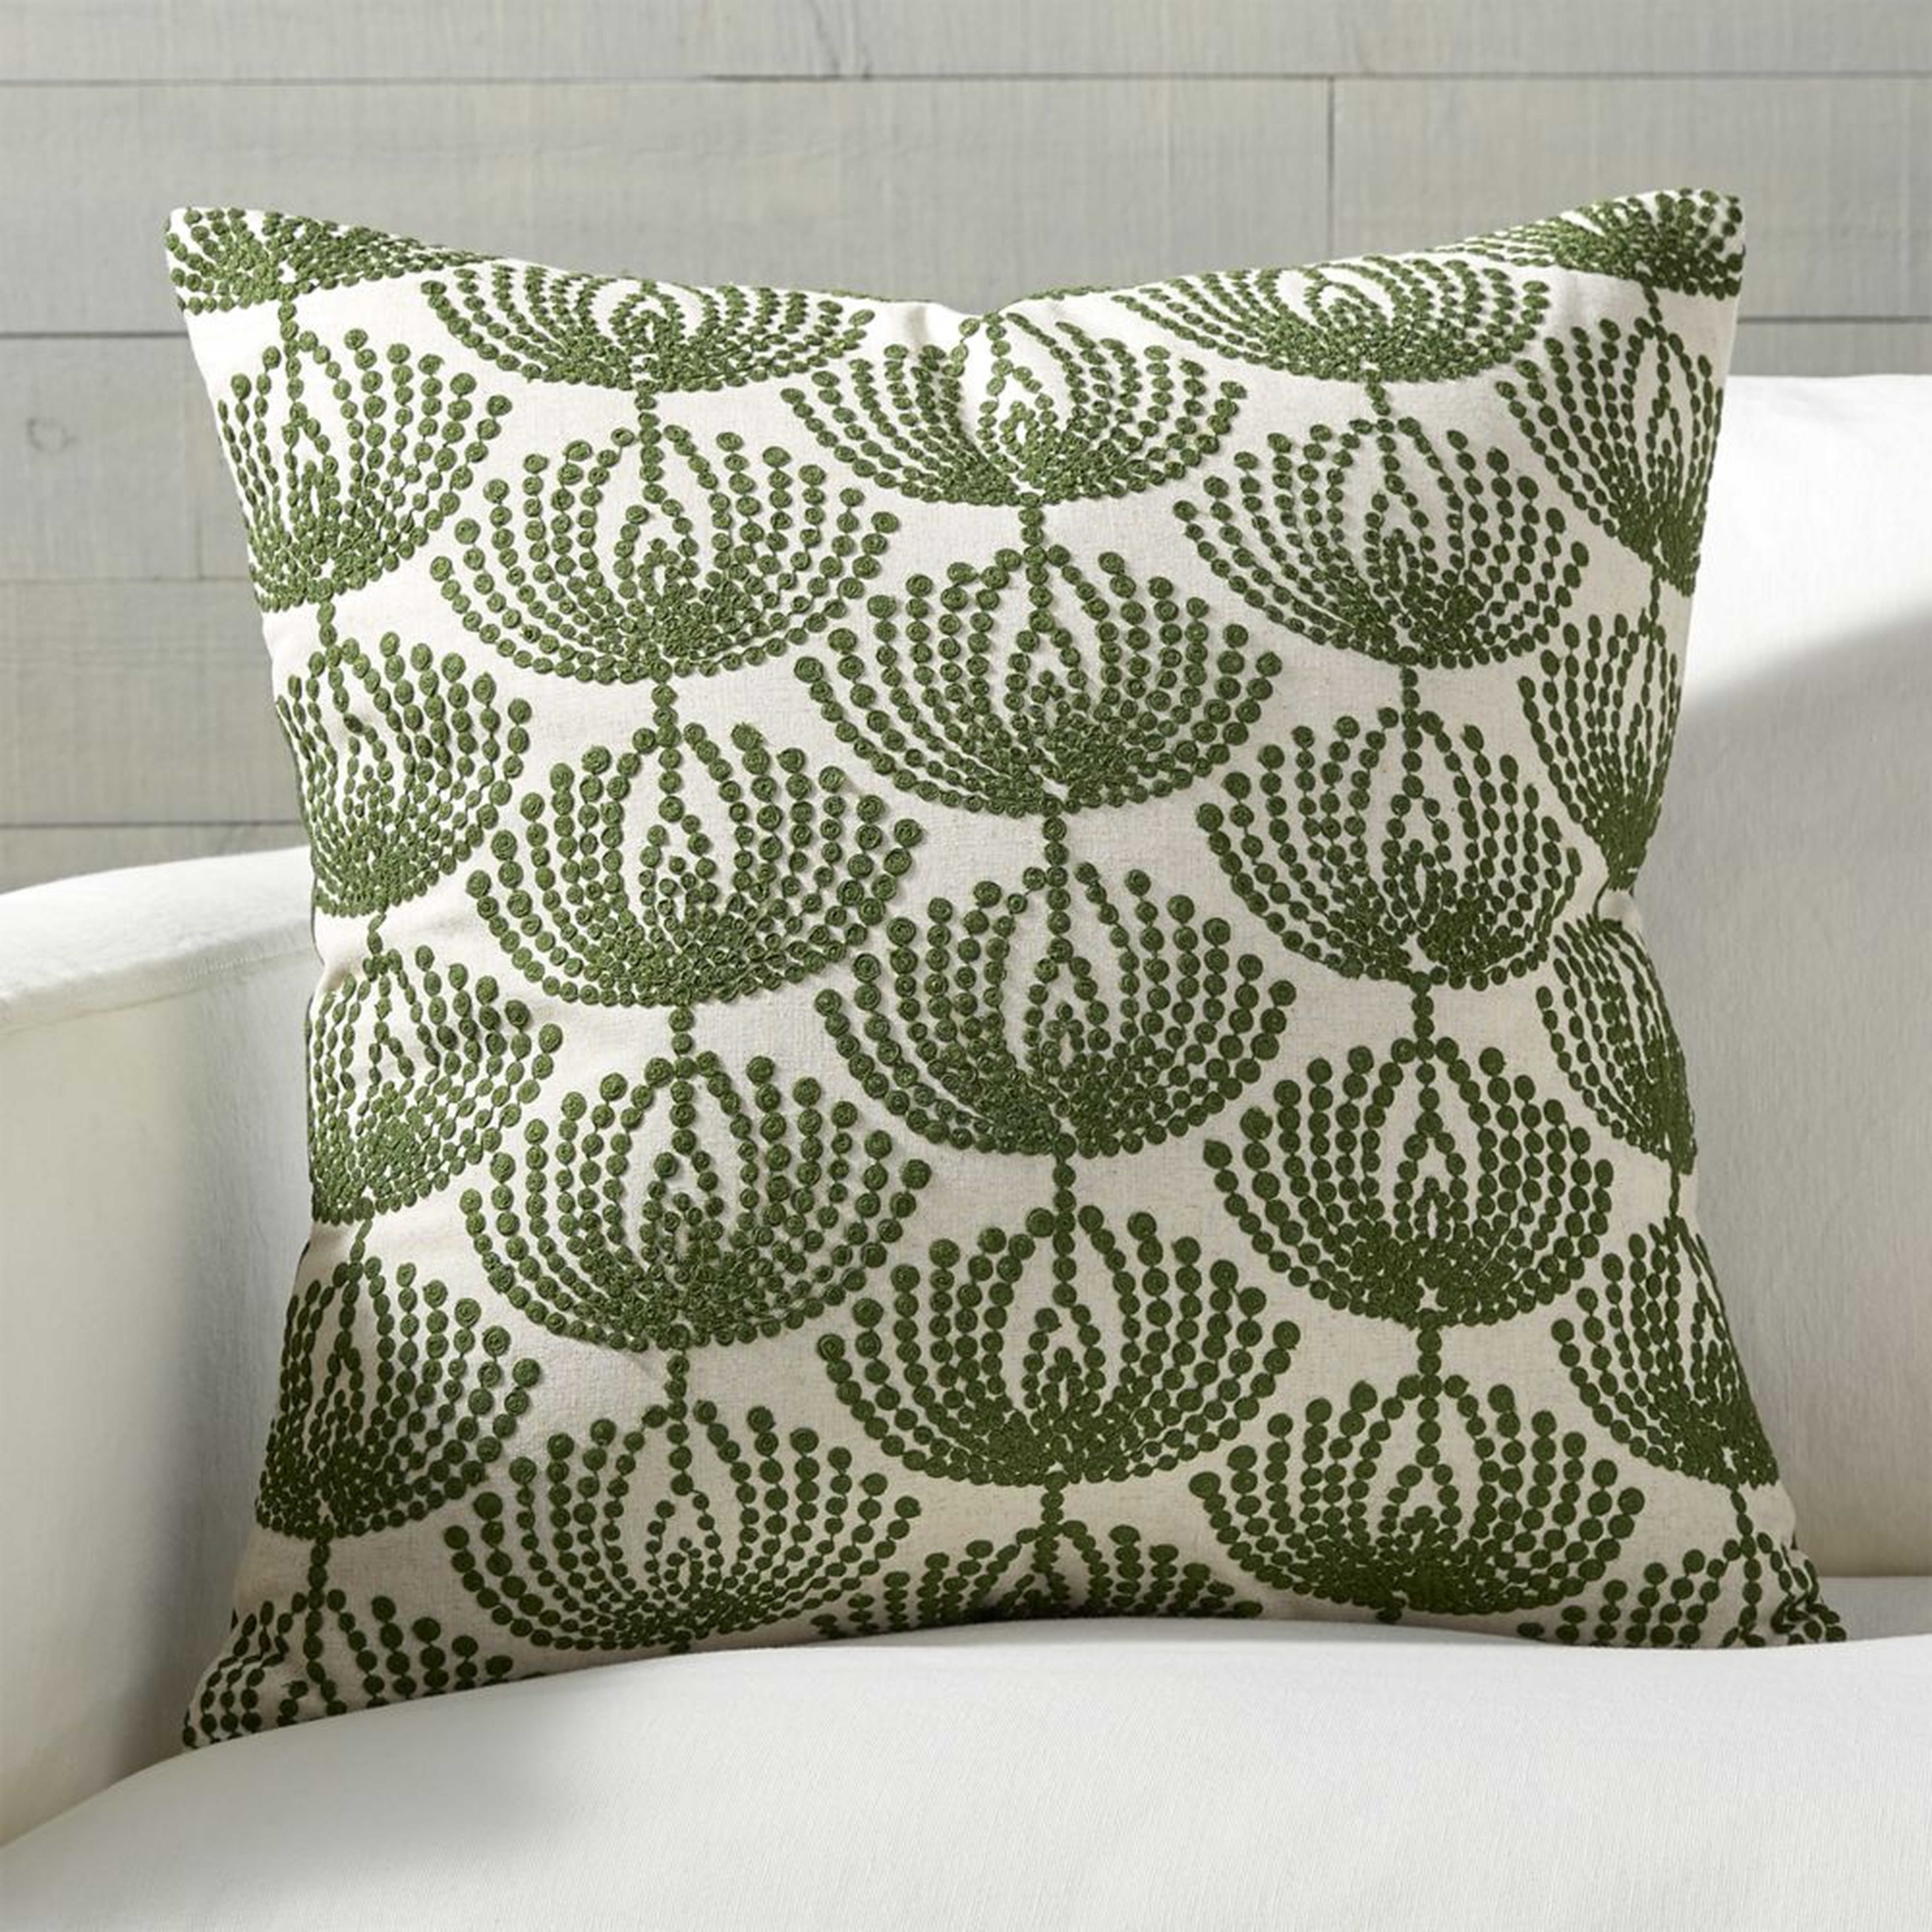 Anessa Green Botanical Pillow with Feather-Down Insert 20" - Crate and Barrel